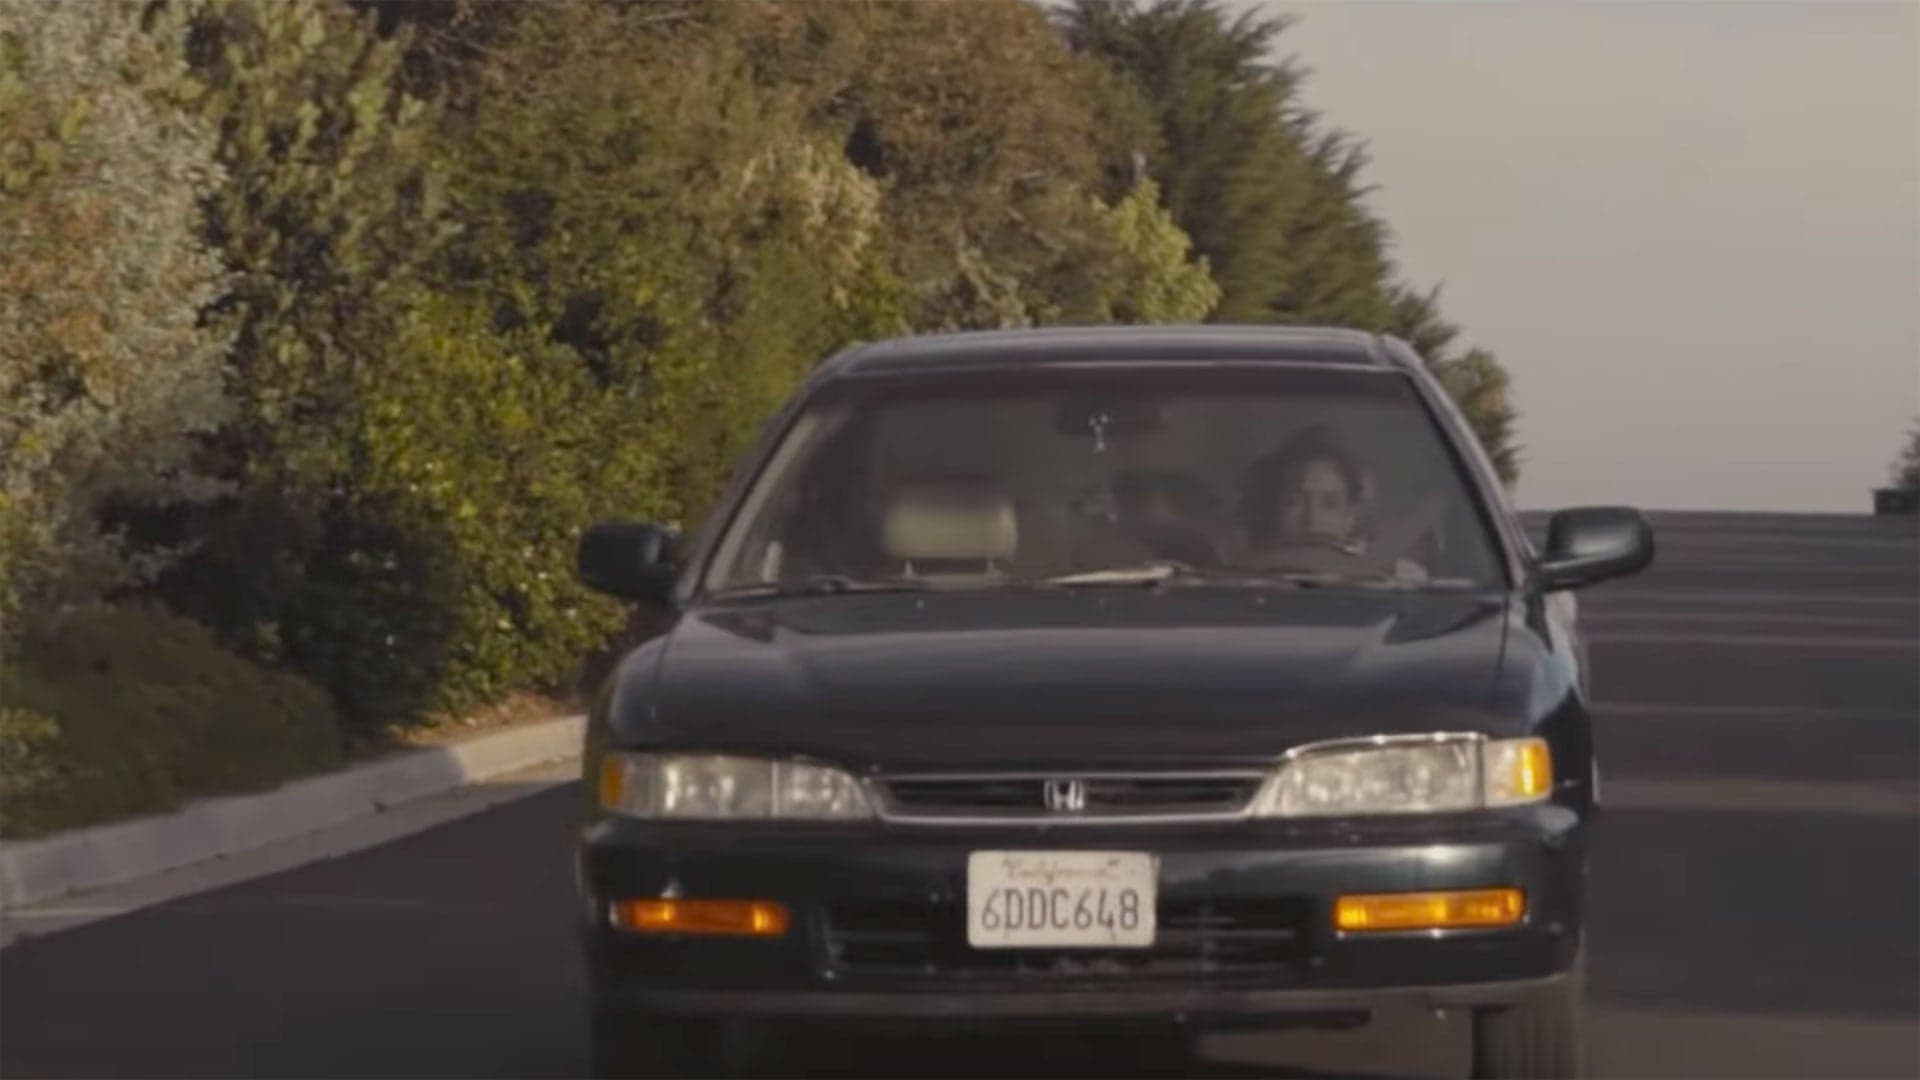 Man Makes Amazing Commercial to Sell His Fiancée’s 1996 Honda Accord for $499